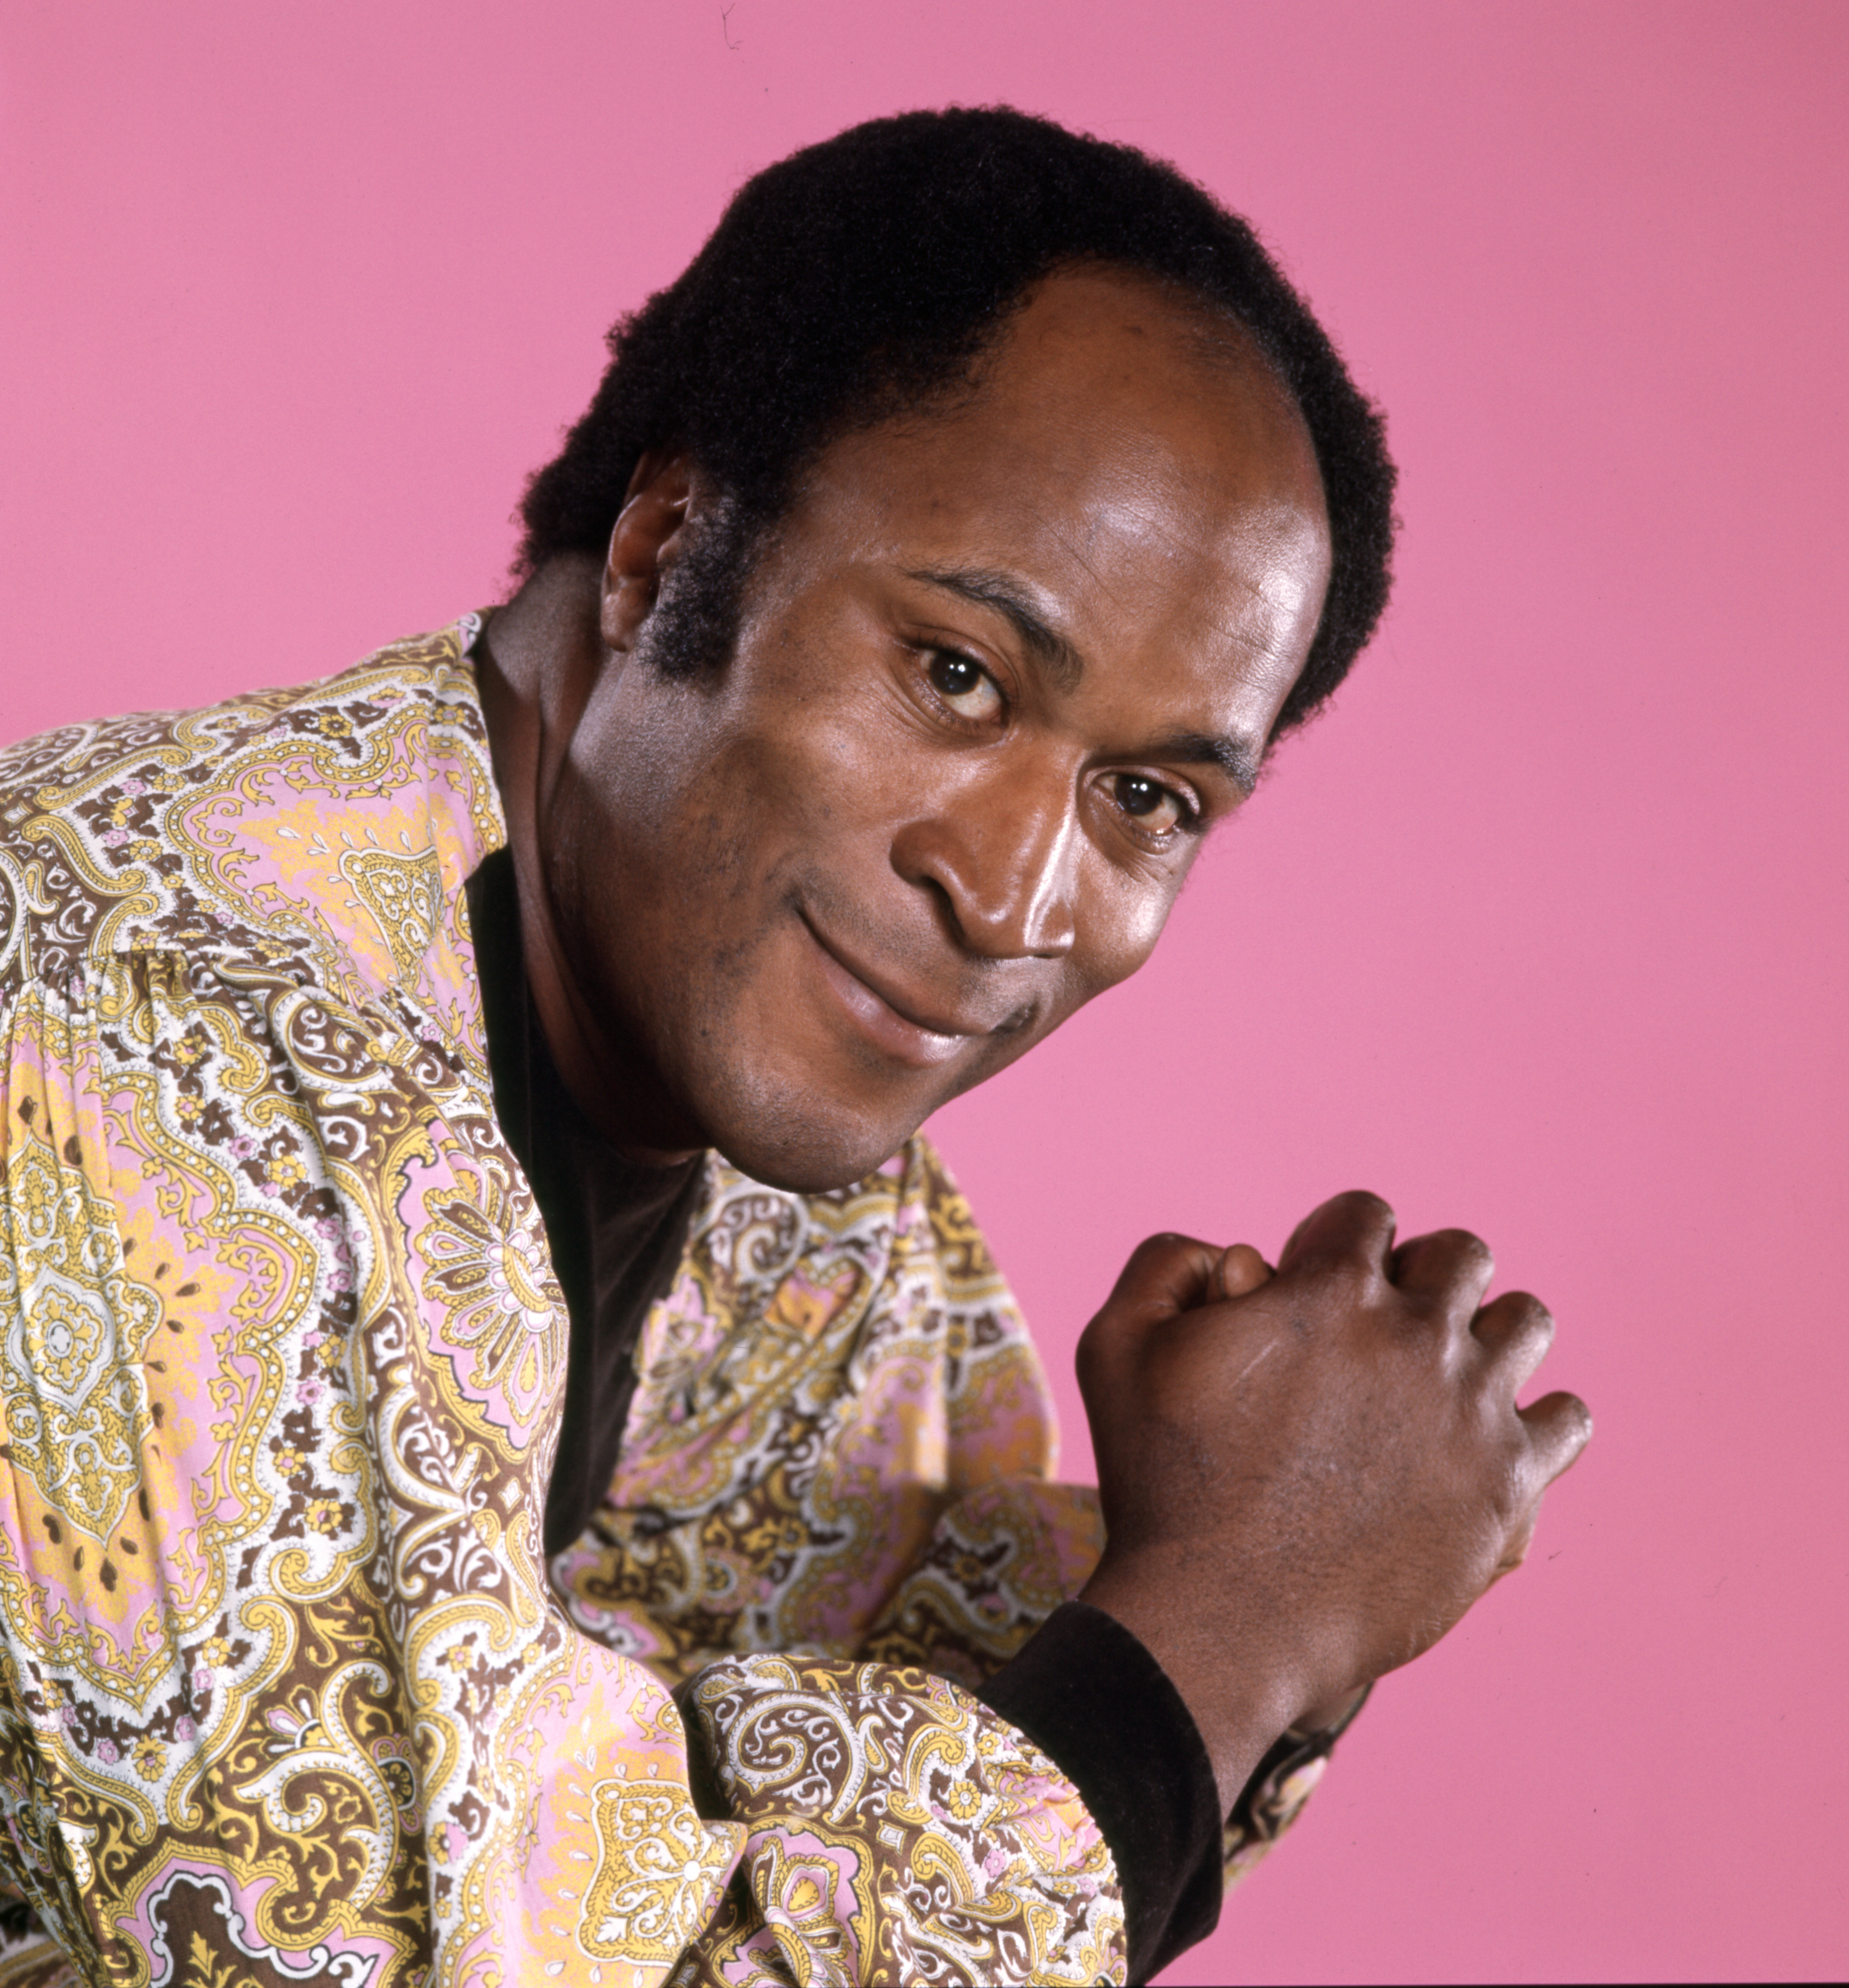 John Amos as James Evans Sr. in "Good Times" on July 1, 1978 | Source: Getty Images